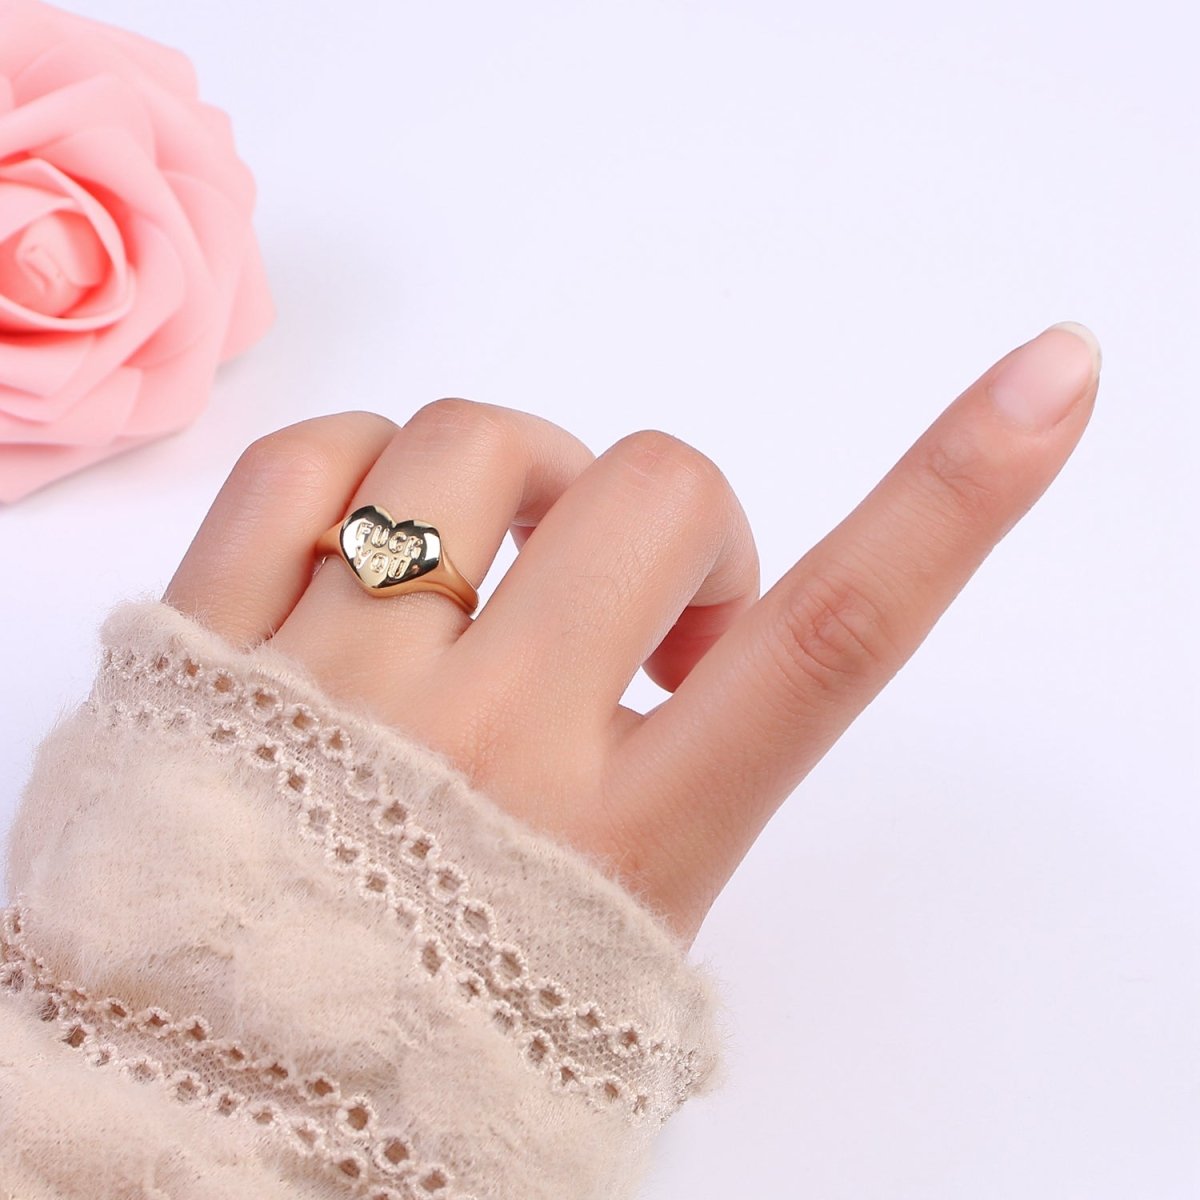 Gold Fuck You Ring, Heart Shaped Signet, Fuckoff rings oval signet ring gold rings for women S-377 - DLUXCA